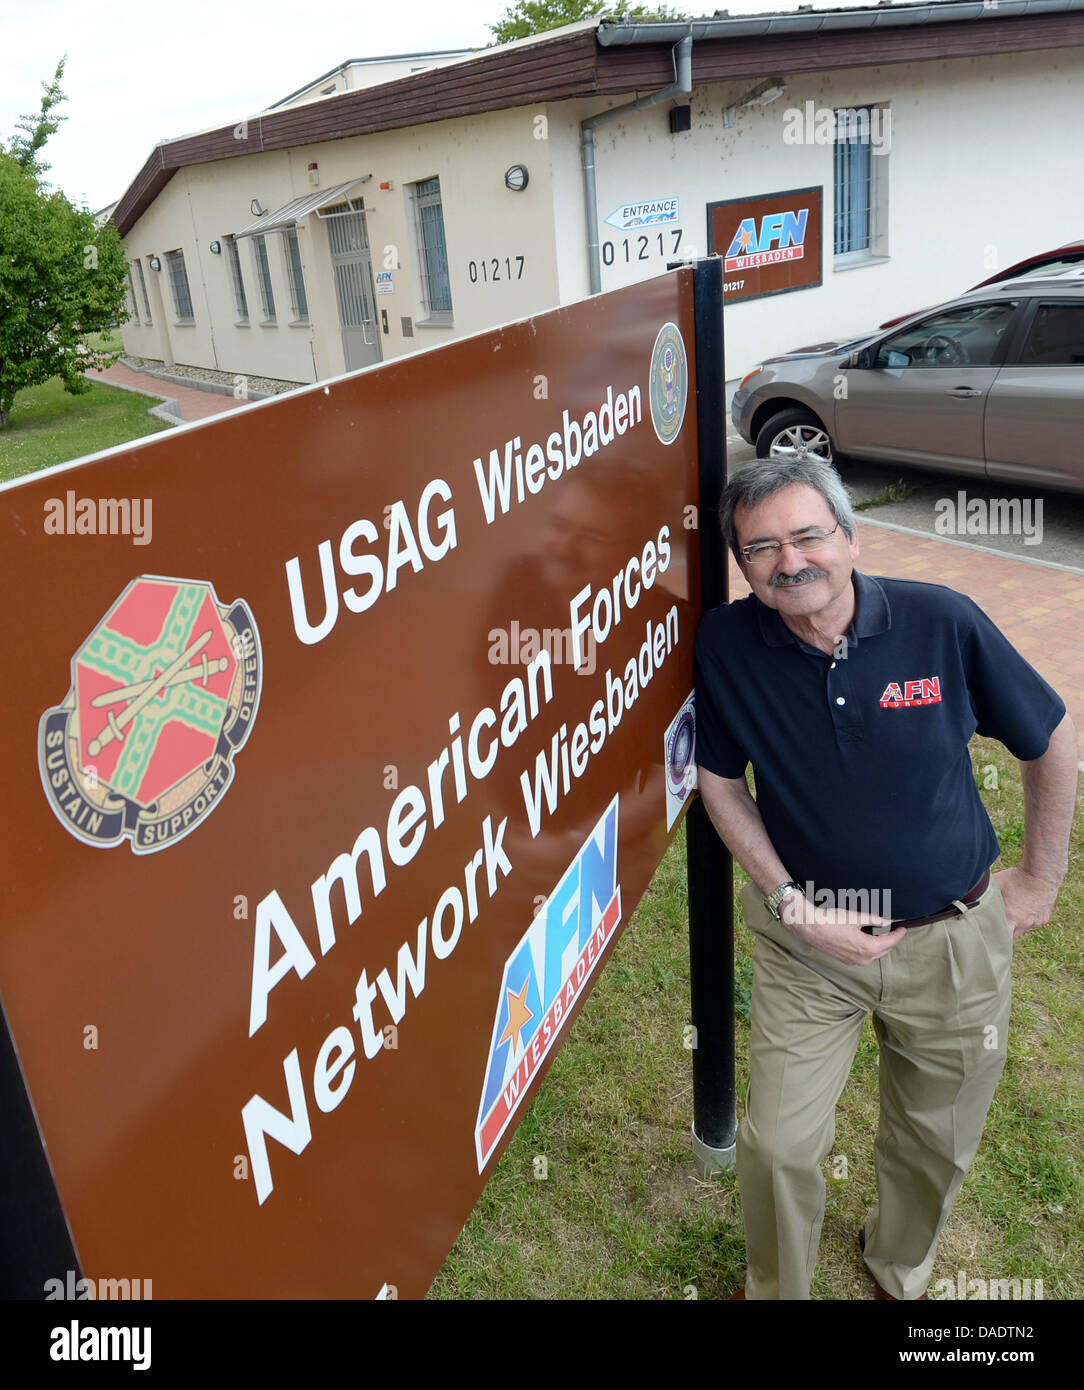 The head of the US Armed Forces Network AFN, Gary Bautell, stands outside the broadcasting studio  in Wiesbaden-Erbenheim, Germany, 11 July 2013. AFN was founded and first went on air in July 1943 setting up local radion stations first in Europe and subesquently around the world where US troops were deployed. Photo: Arne Dedert Stock Photo